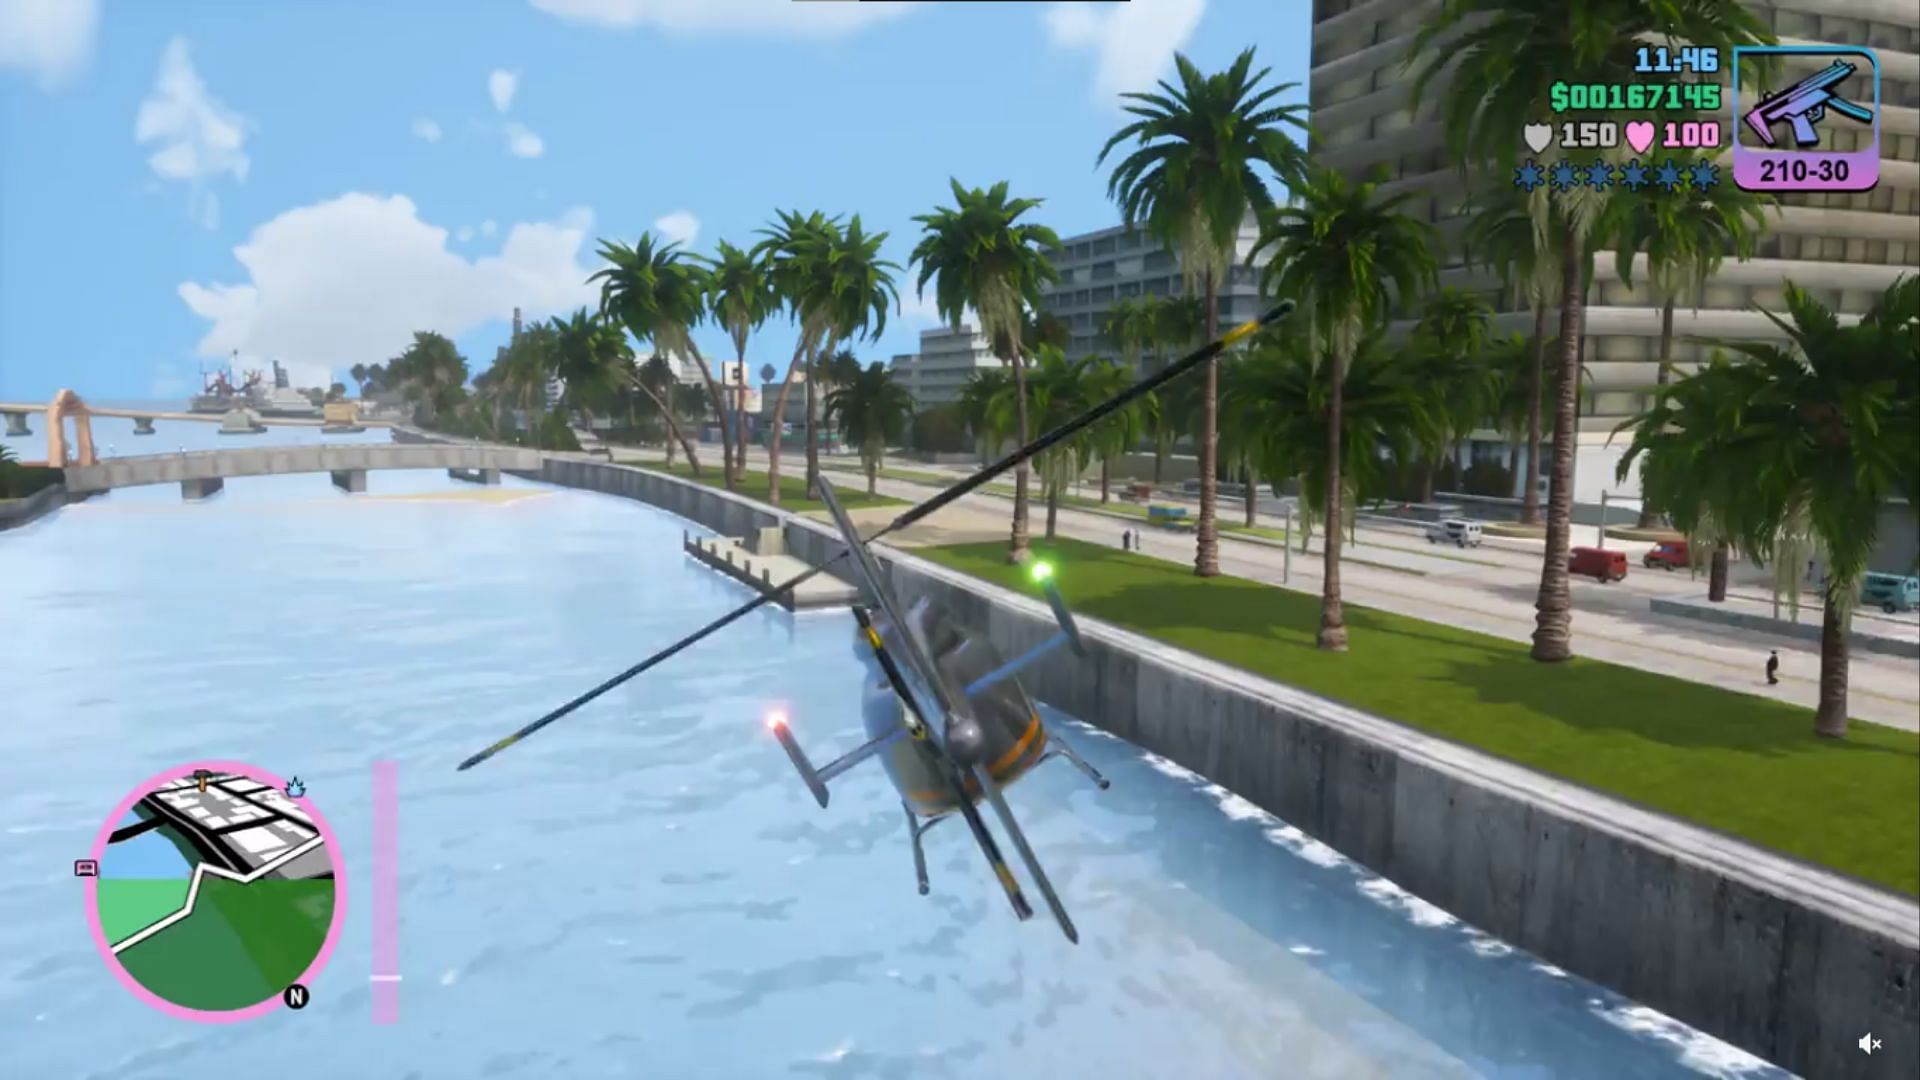 &ldquo;Never make another game&rdquo;: GTA Vice City Definitive Edition Redditor experiences a hilarious glitch while landing a helicopter (Image via u/Mobius1014/Reddit )